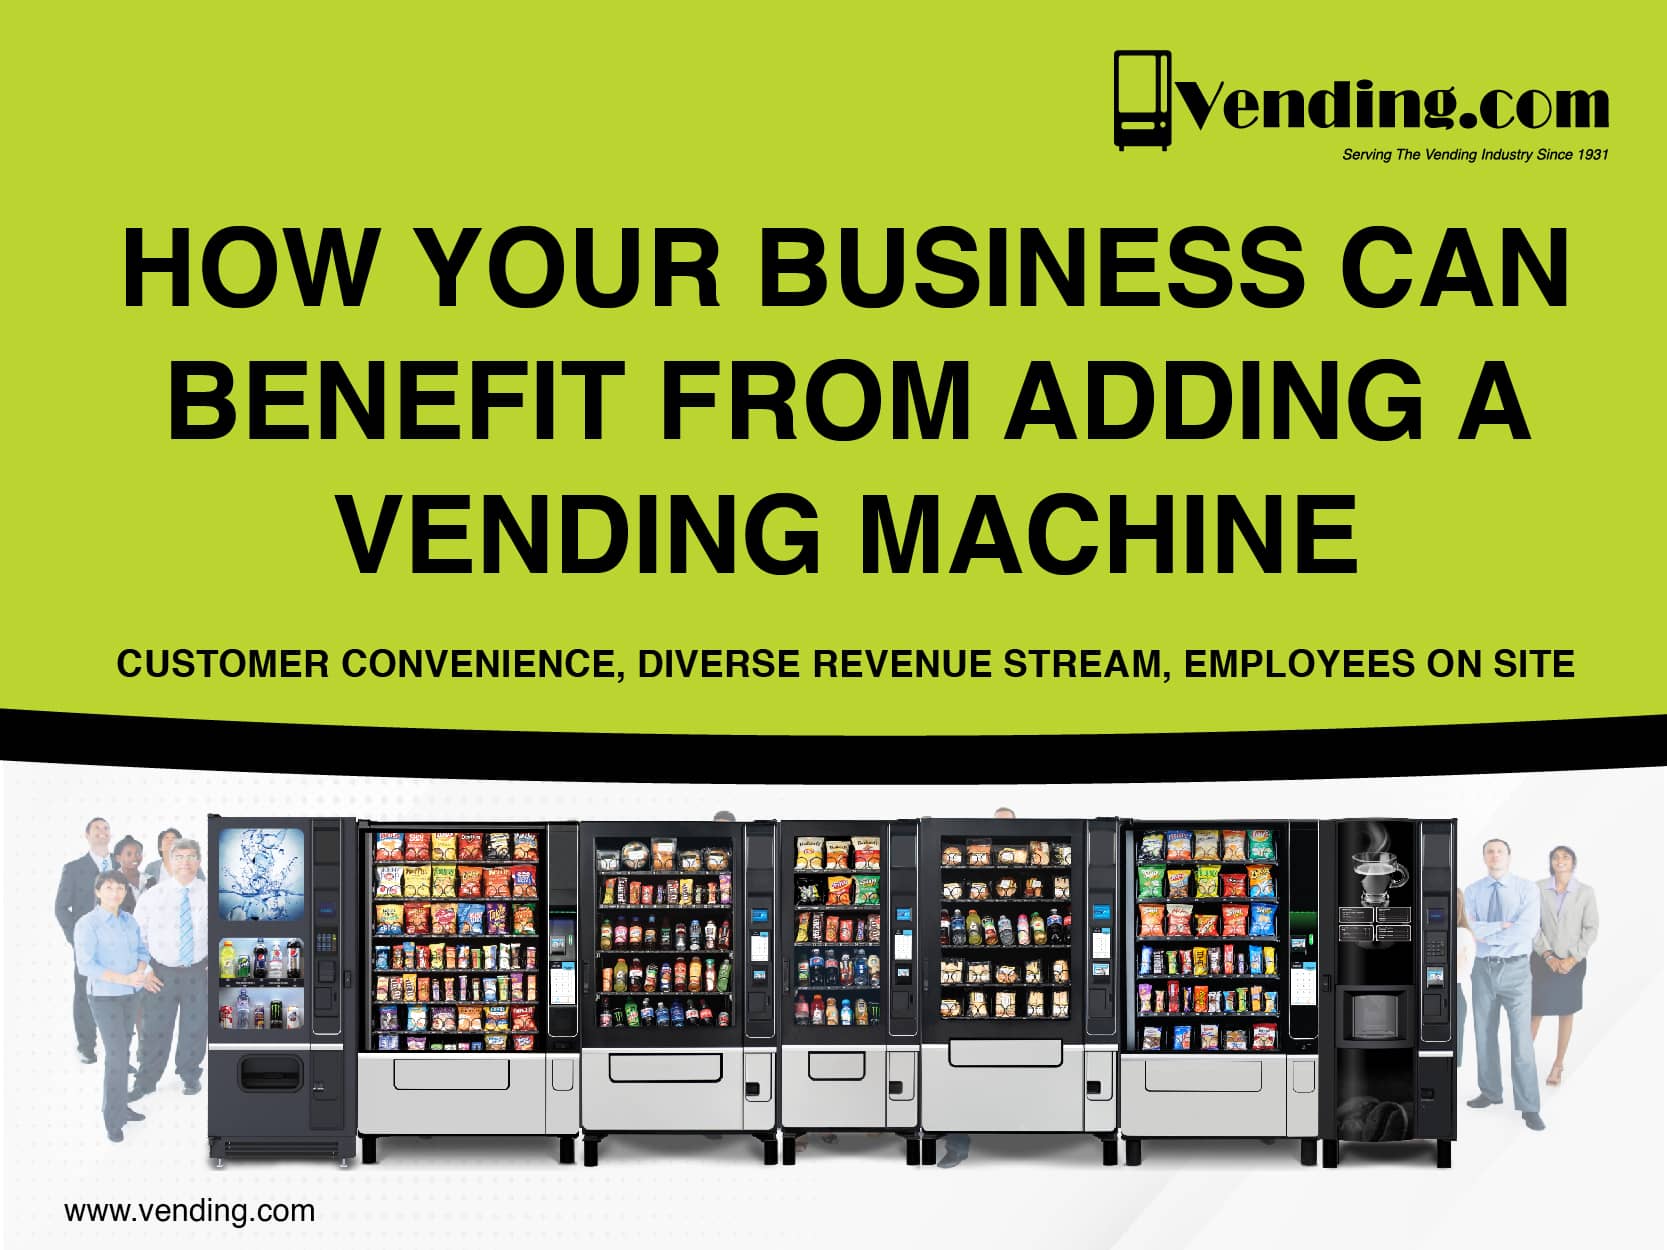 How Your Business Can Benefit From Adding a Vending Machine